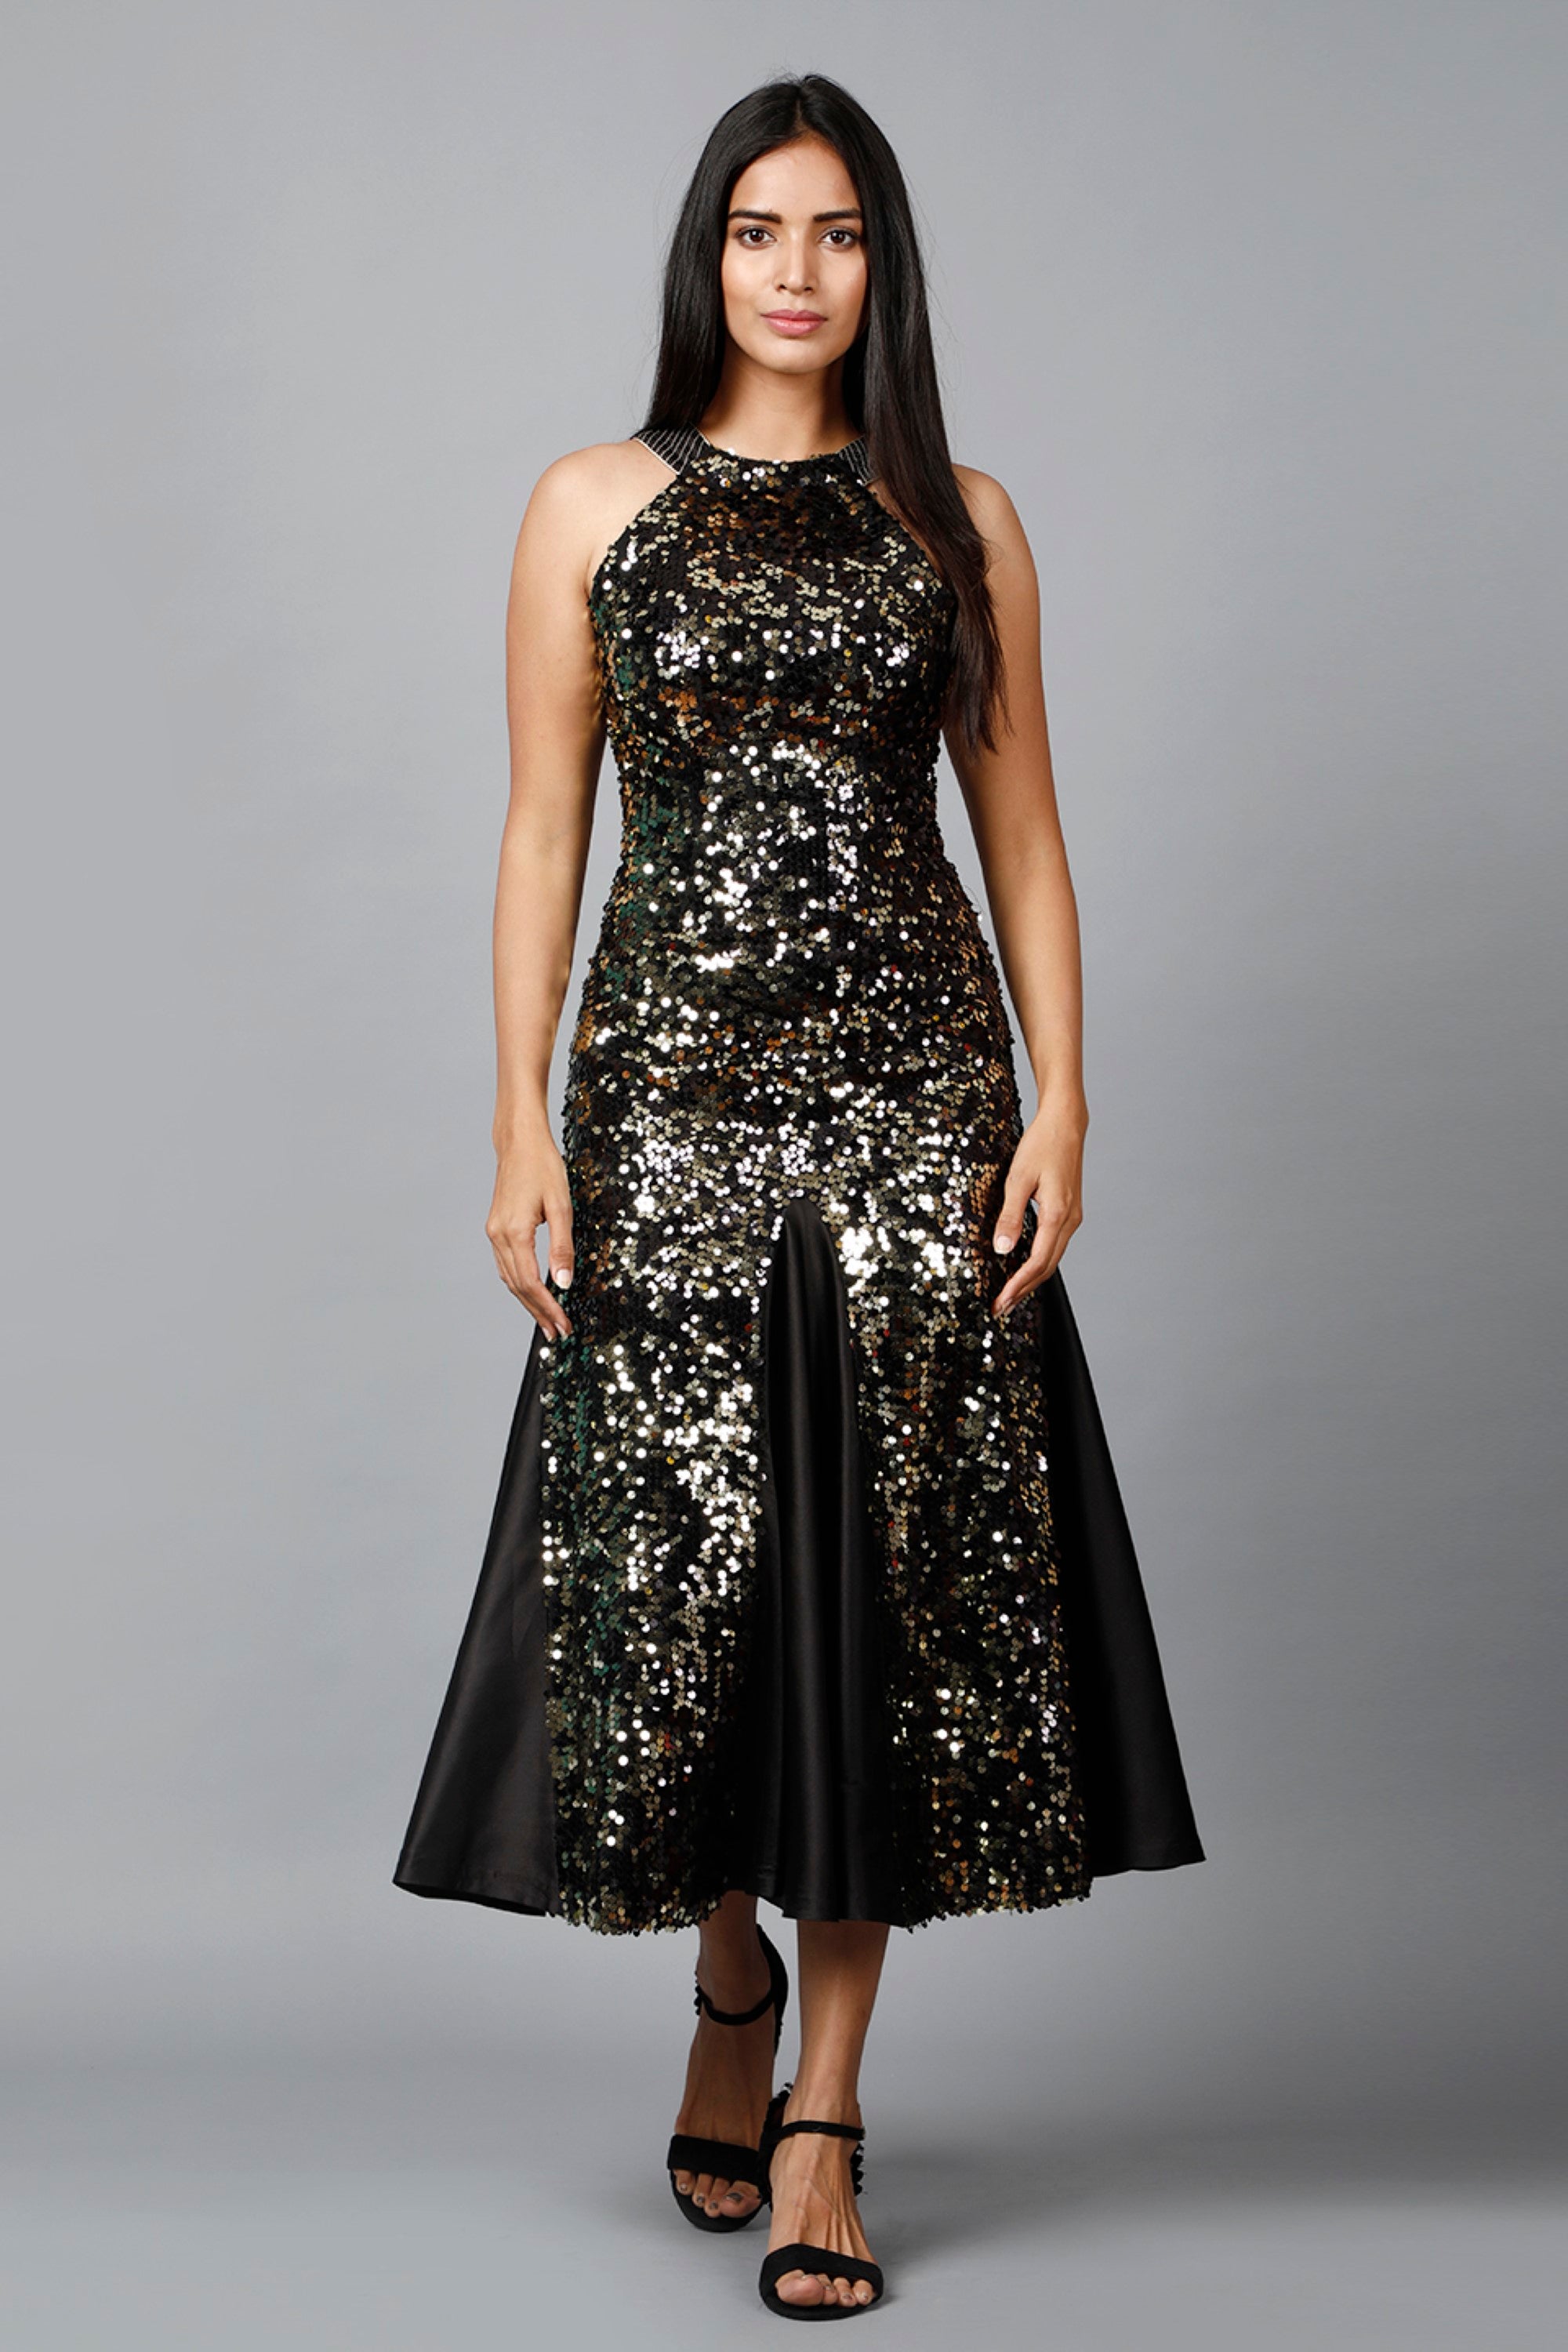 Women's Gold Sequins Halter Neck  Mermaid Dress - MIRACOLOS by Ruchi